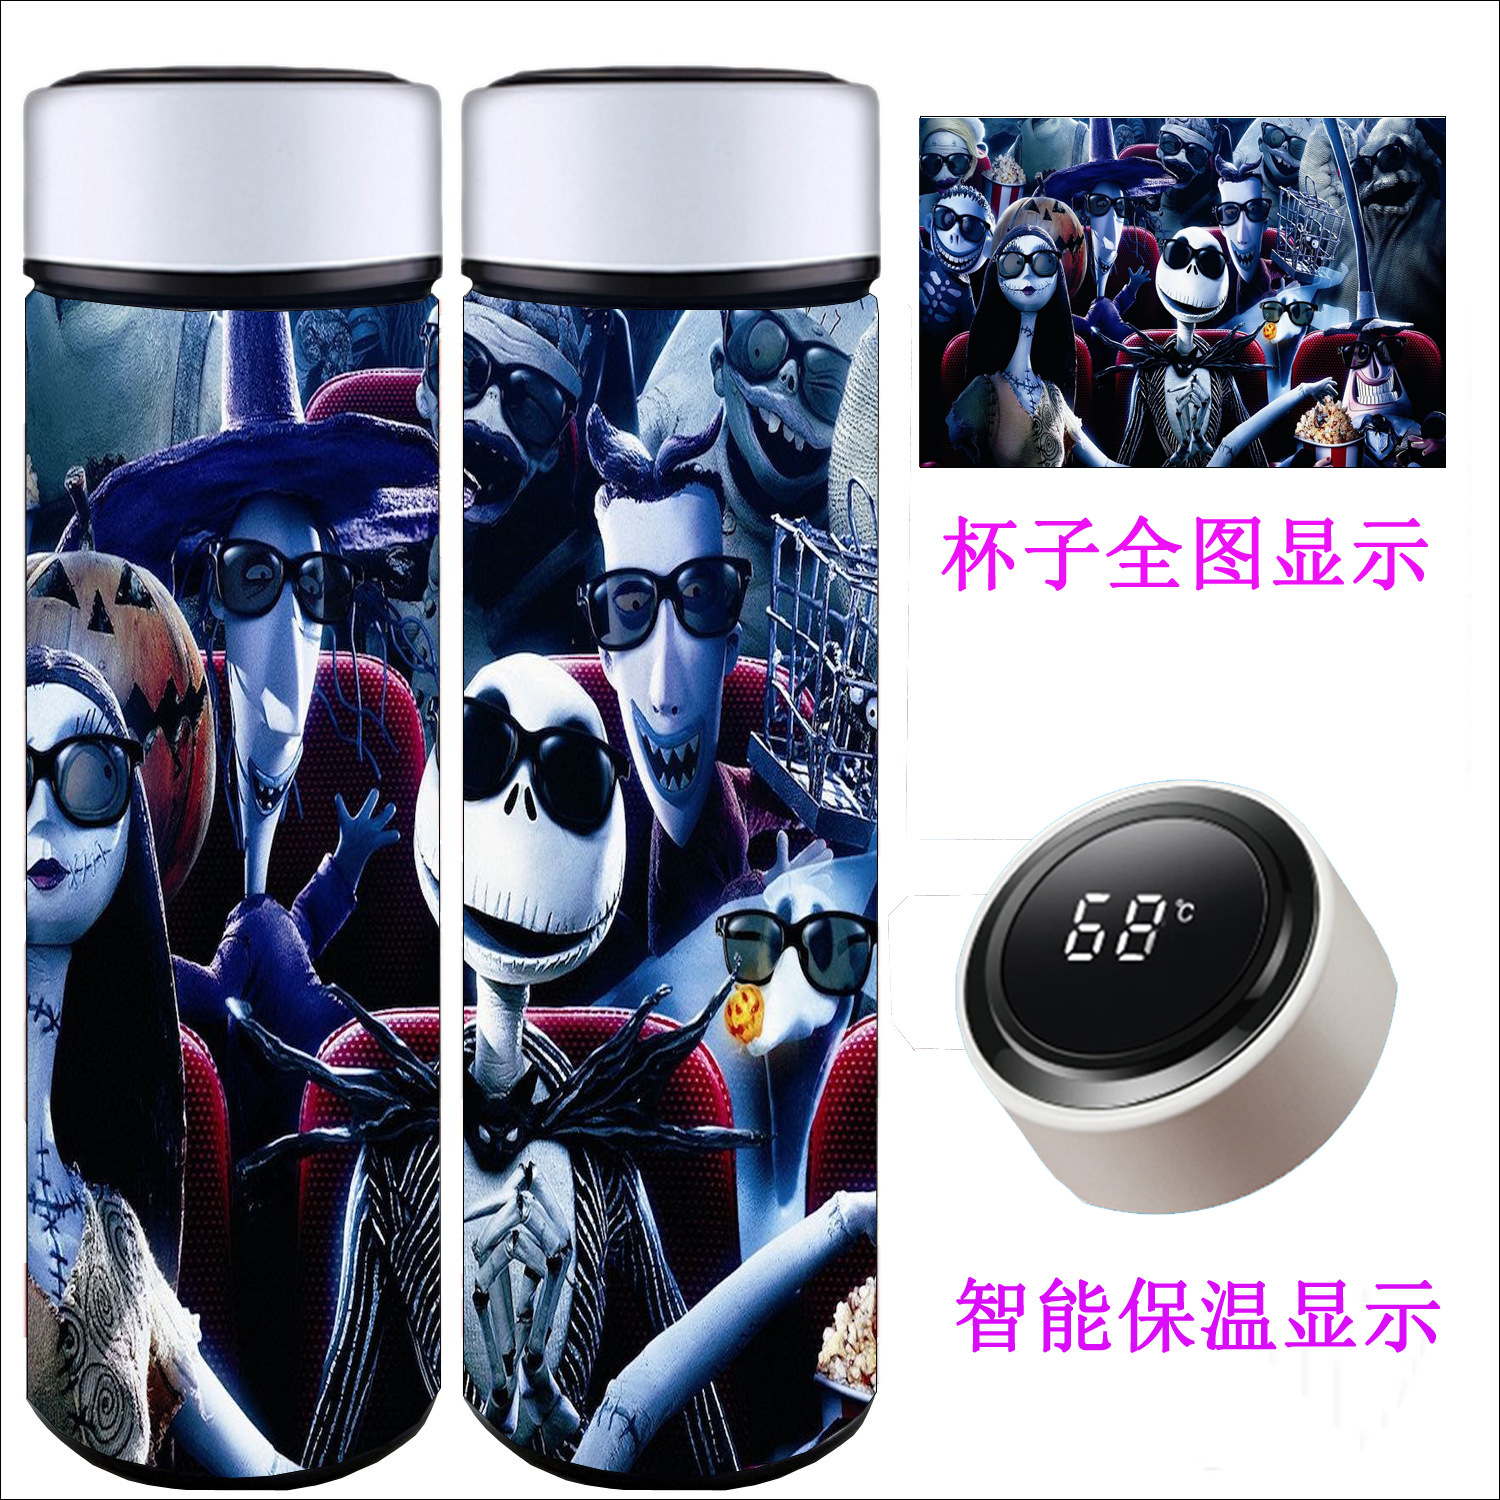 The Nightmare Before Christmas anime Intelligent temperature measuring water cup 500ml